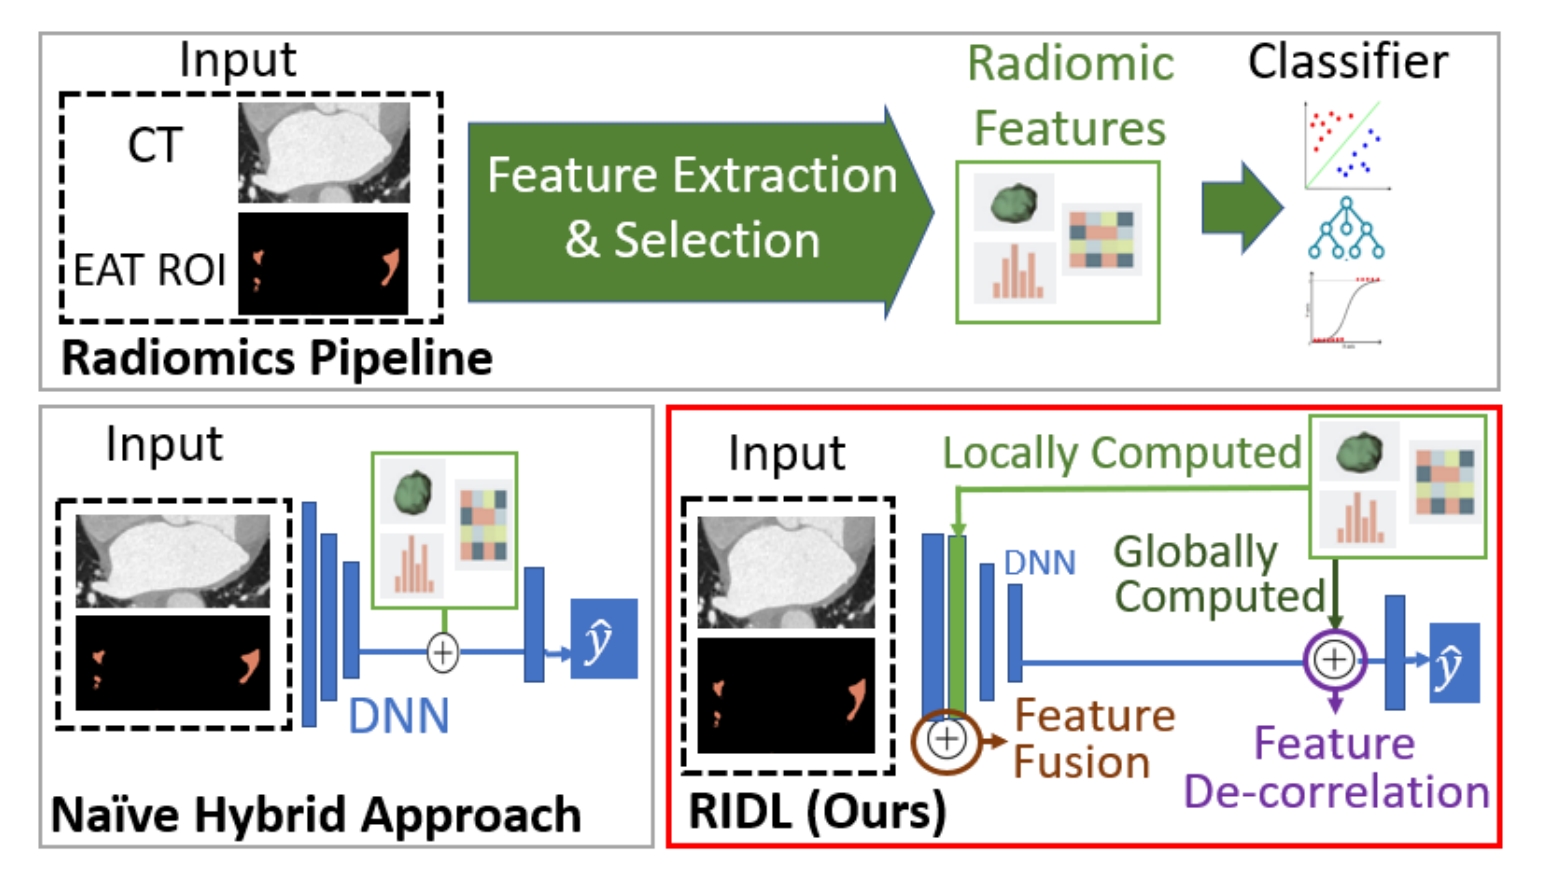 Radiomics-Informed Deep Learning for Classification of Atrial Fibrillation Sub-Types from Left-Atrium CT Volumes